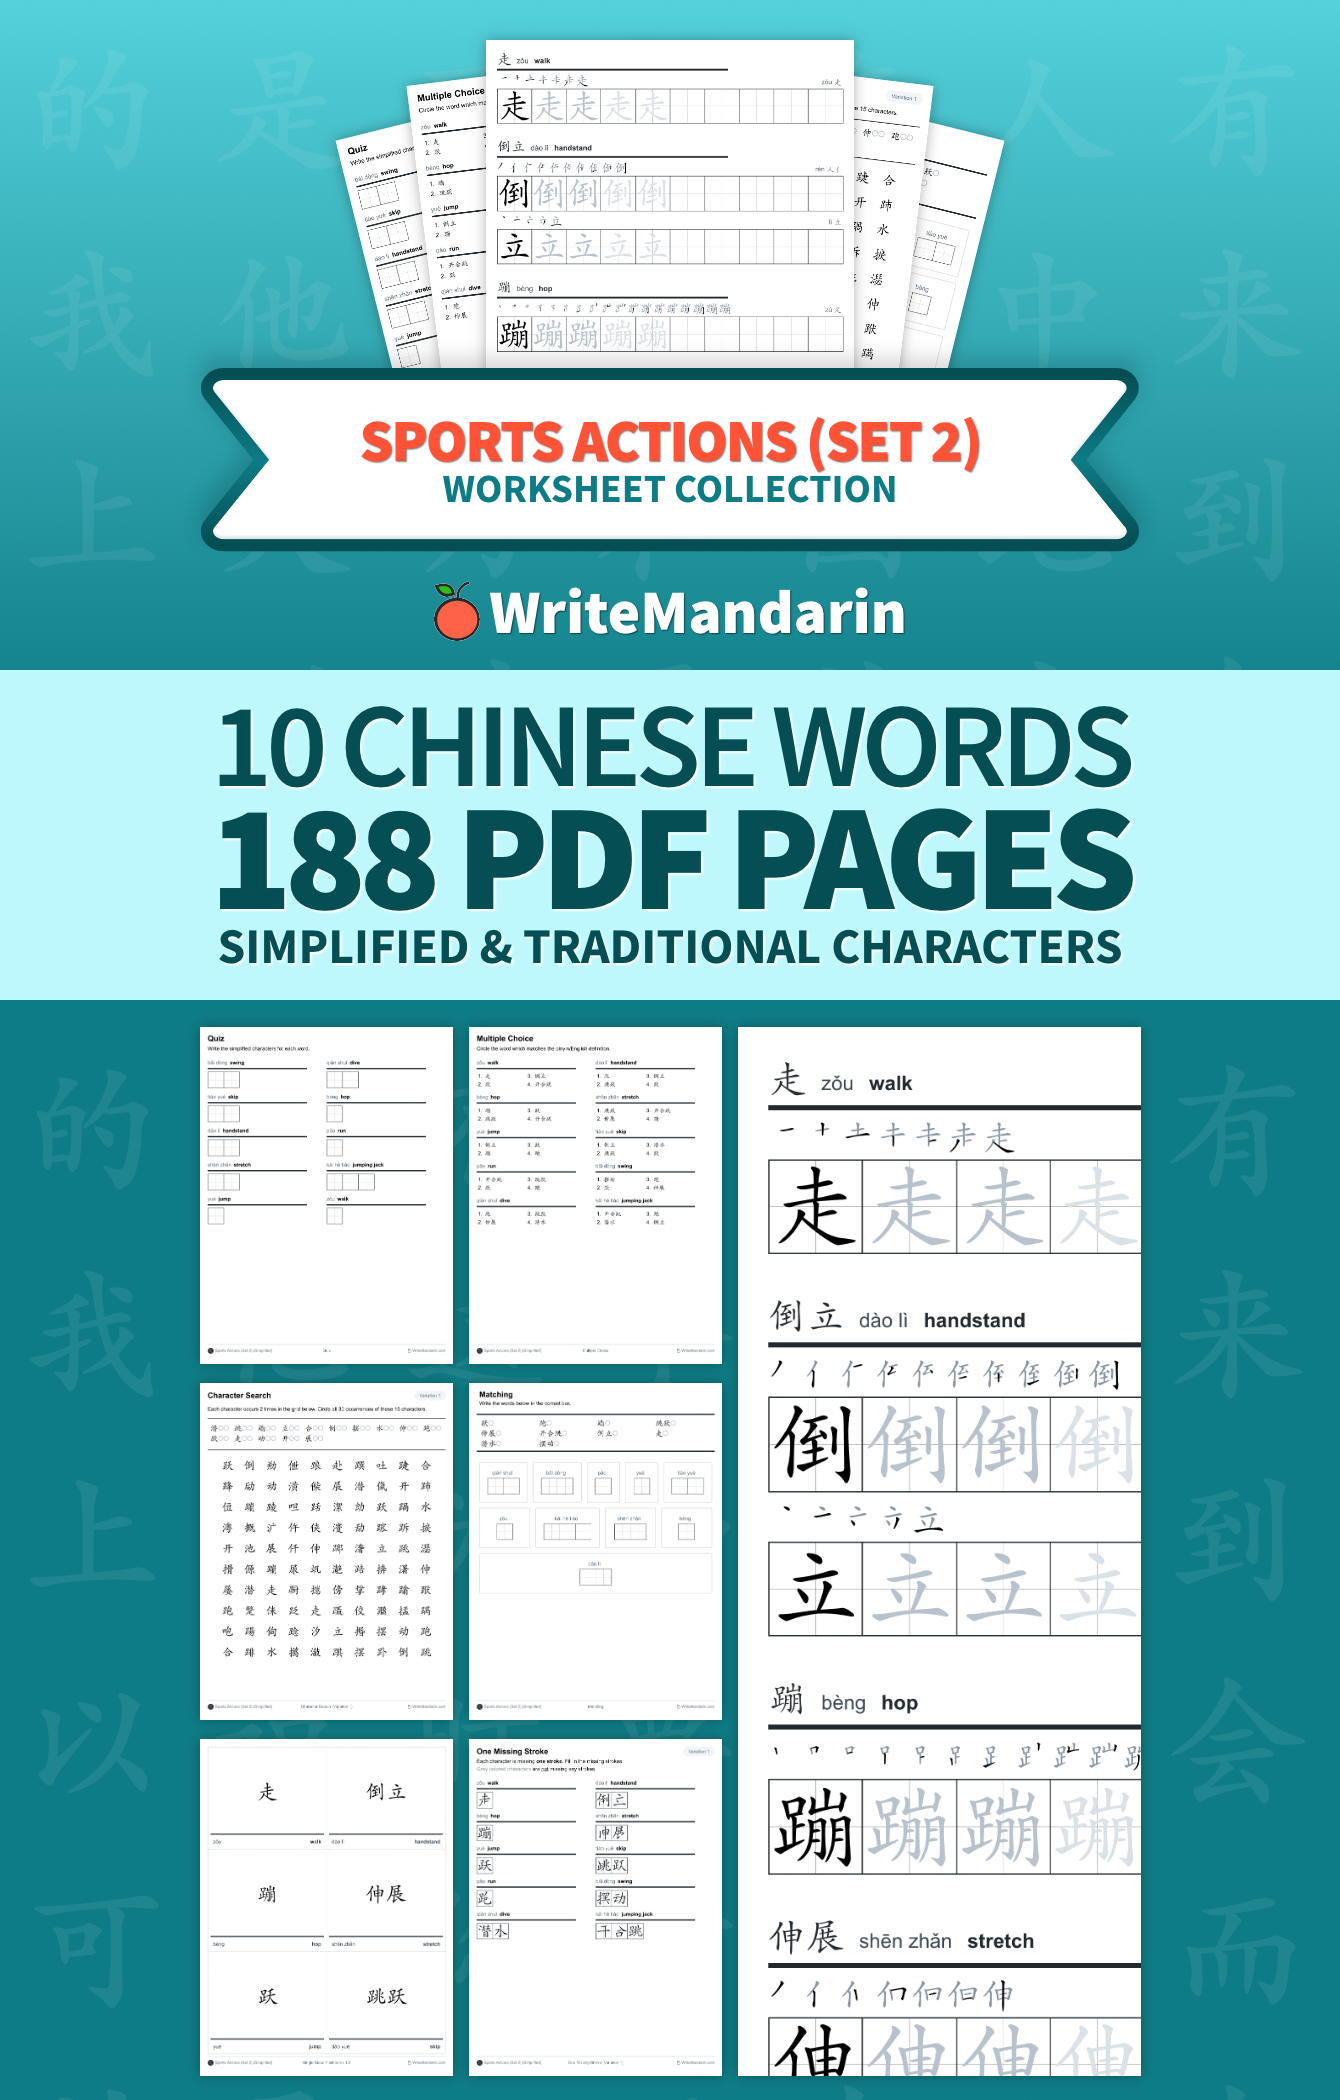 Preview image of Sports Actions (Set 2) worksheet collection